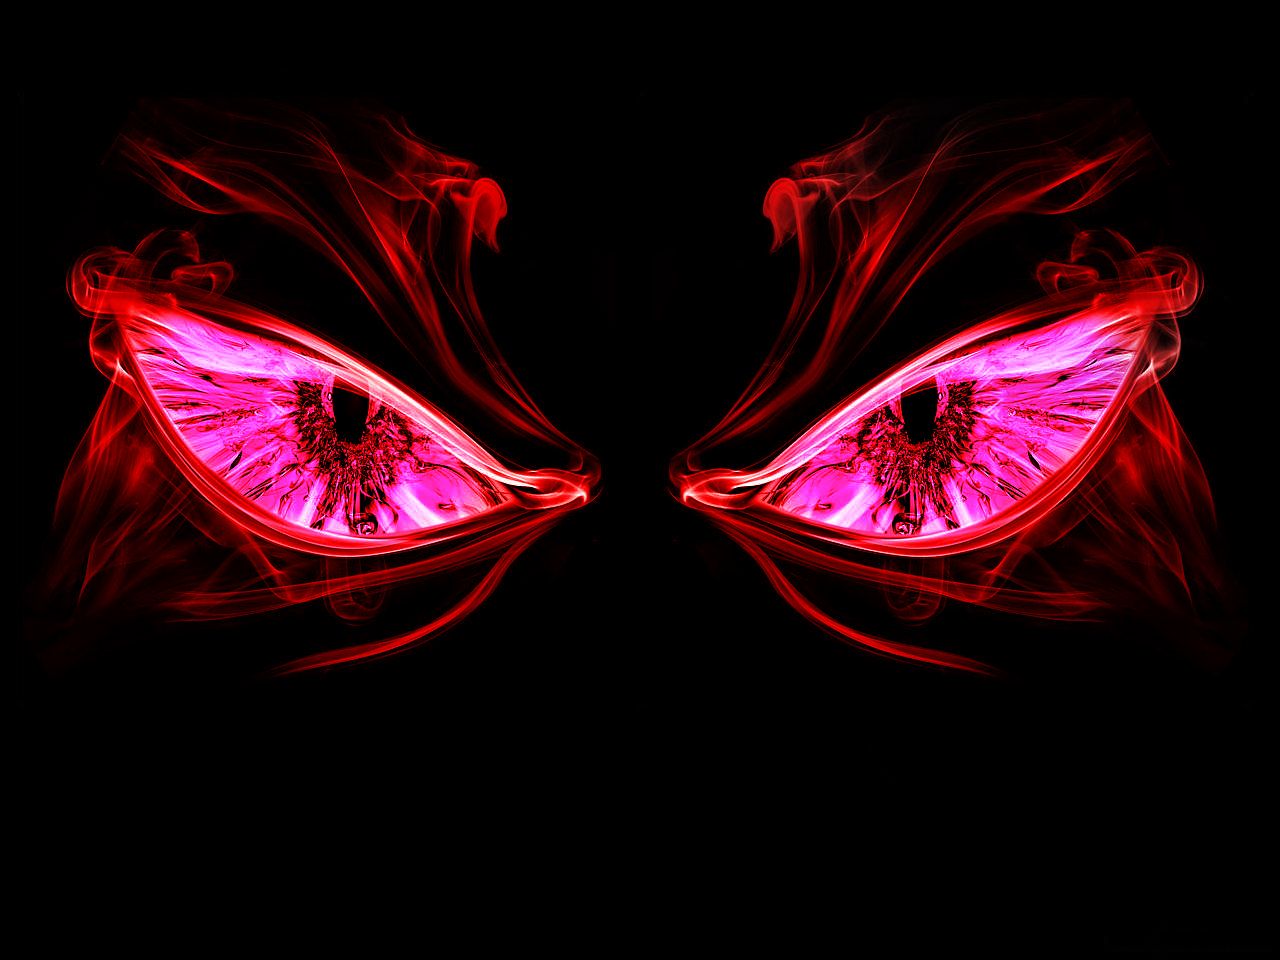 Two scary red eyes in the night